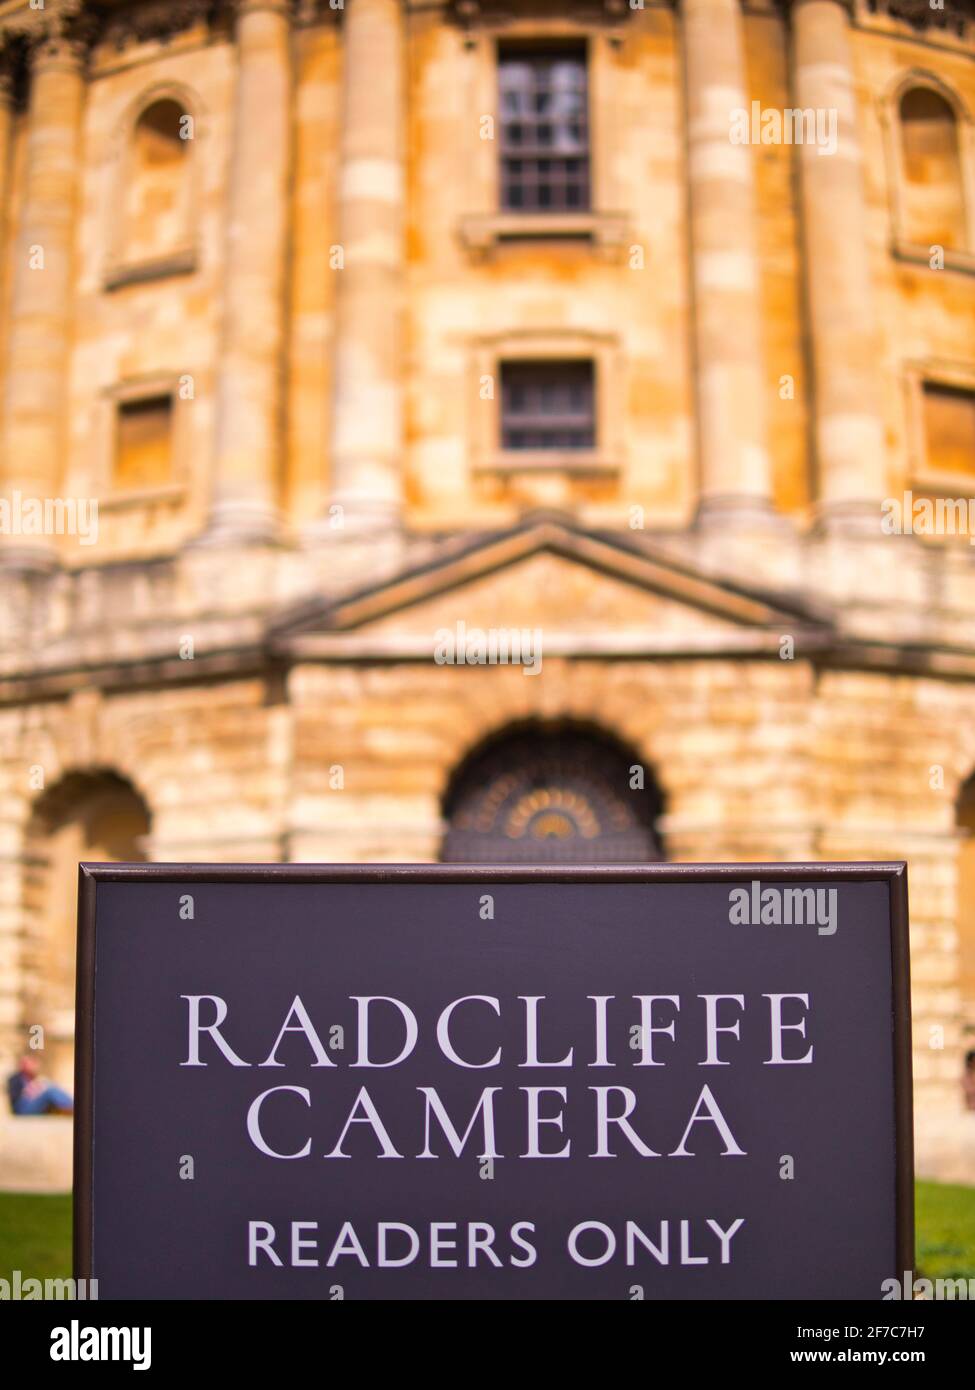 Reader Only Sign, Radcliffe Camera, University of Oxford, Oxfordshire, England, GB, GB. Stockfoto